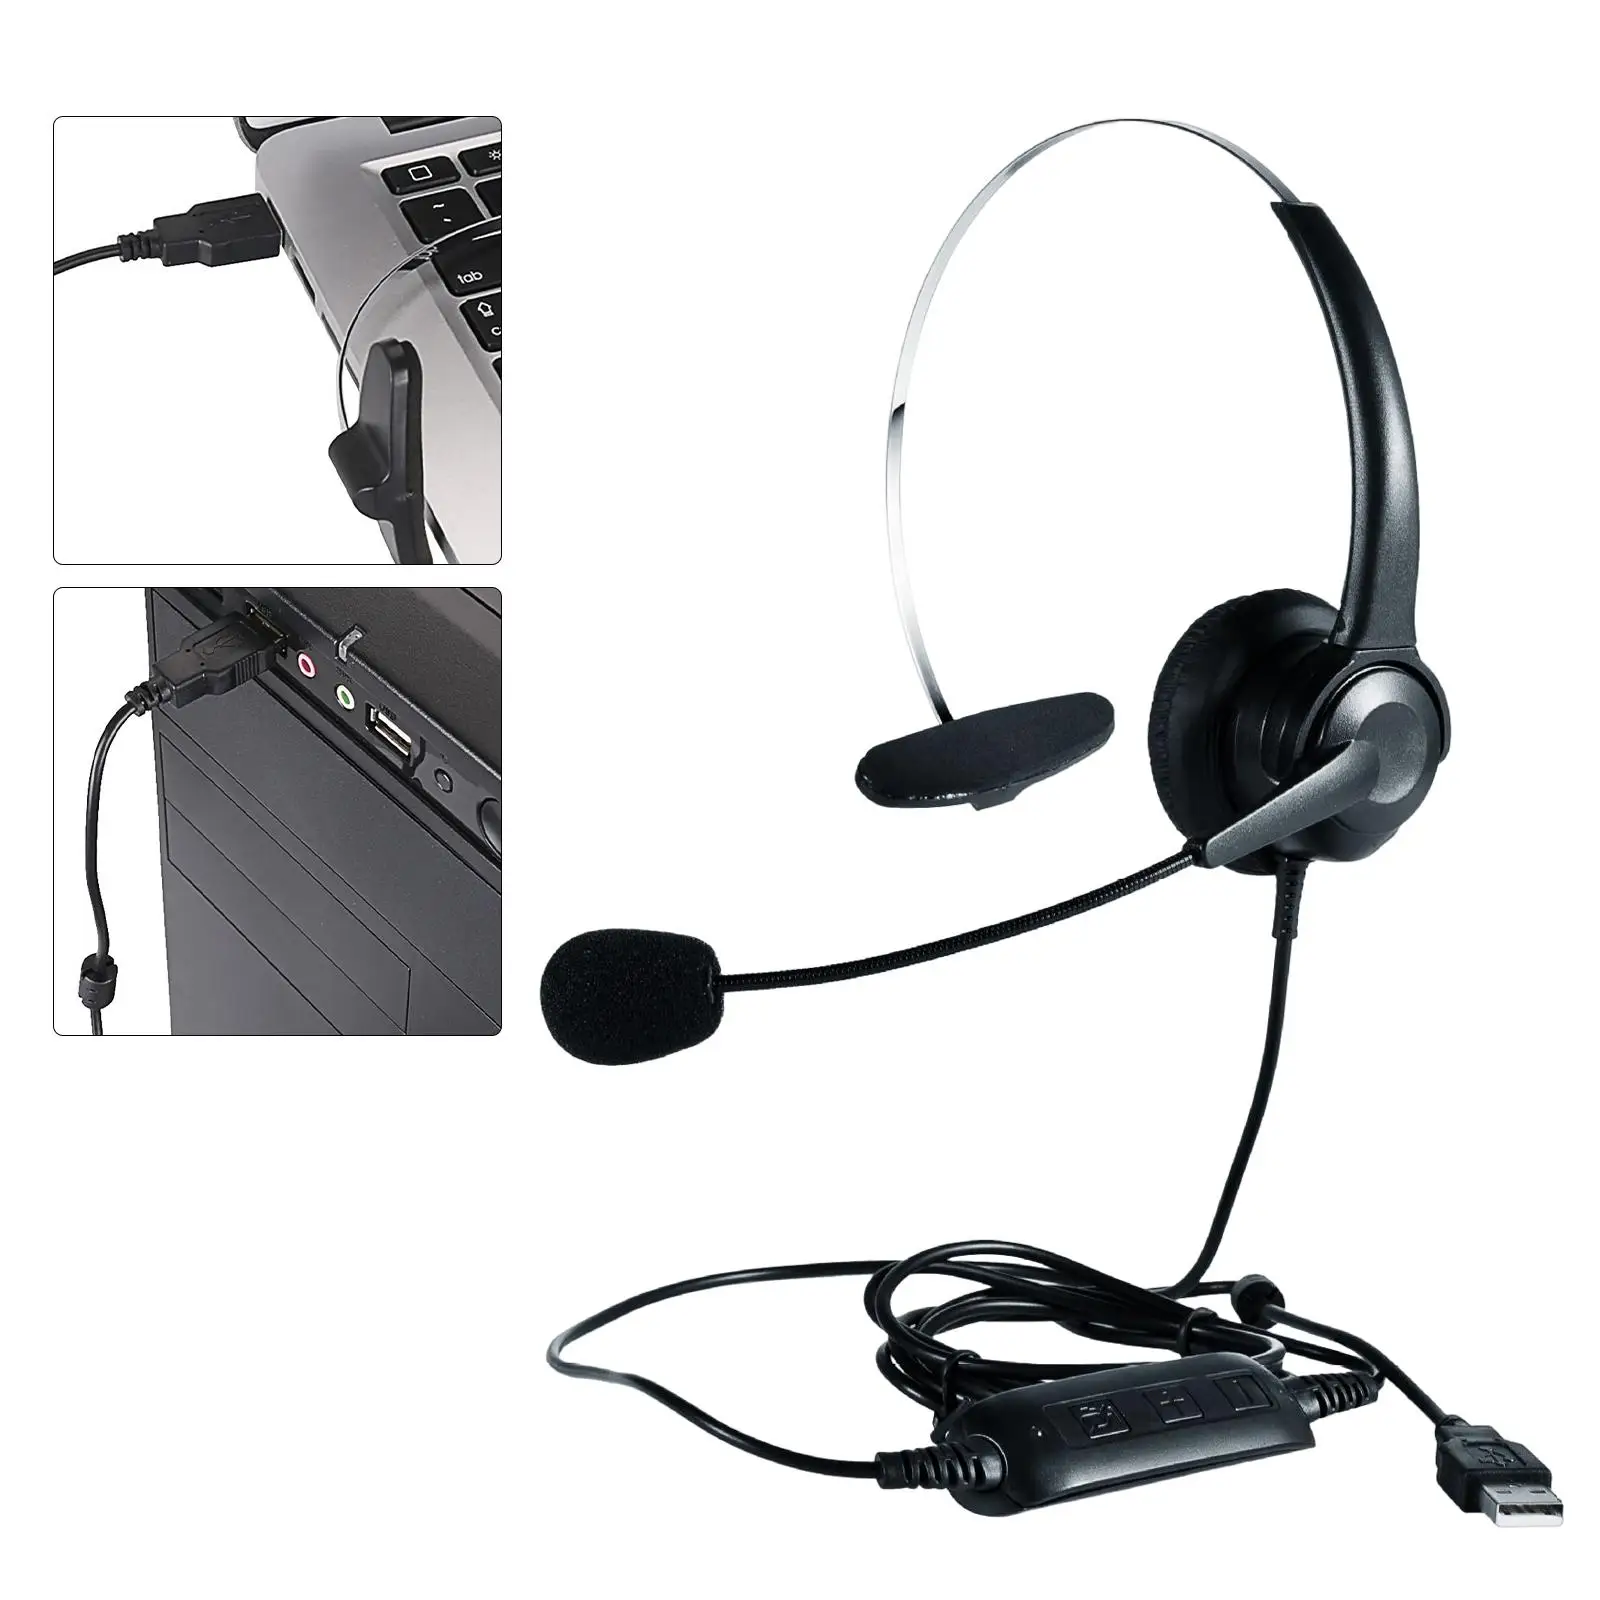 Wired USB Computer Headset Soft Earmuffs Noise Canceling Stereo Headset with Microphone for Home Conferences Classroom Office